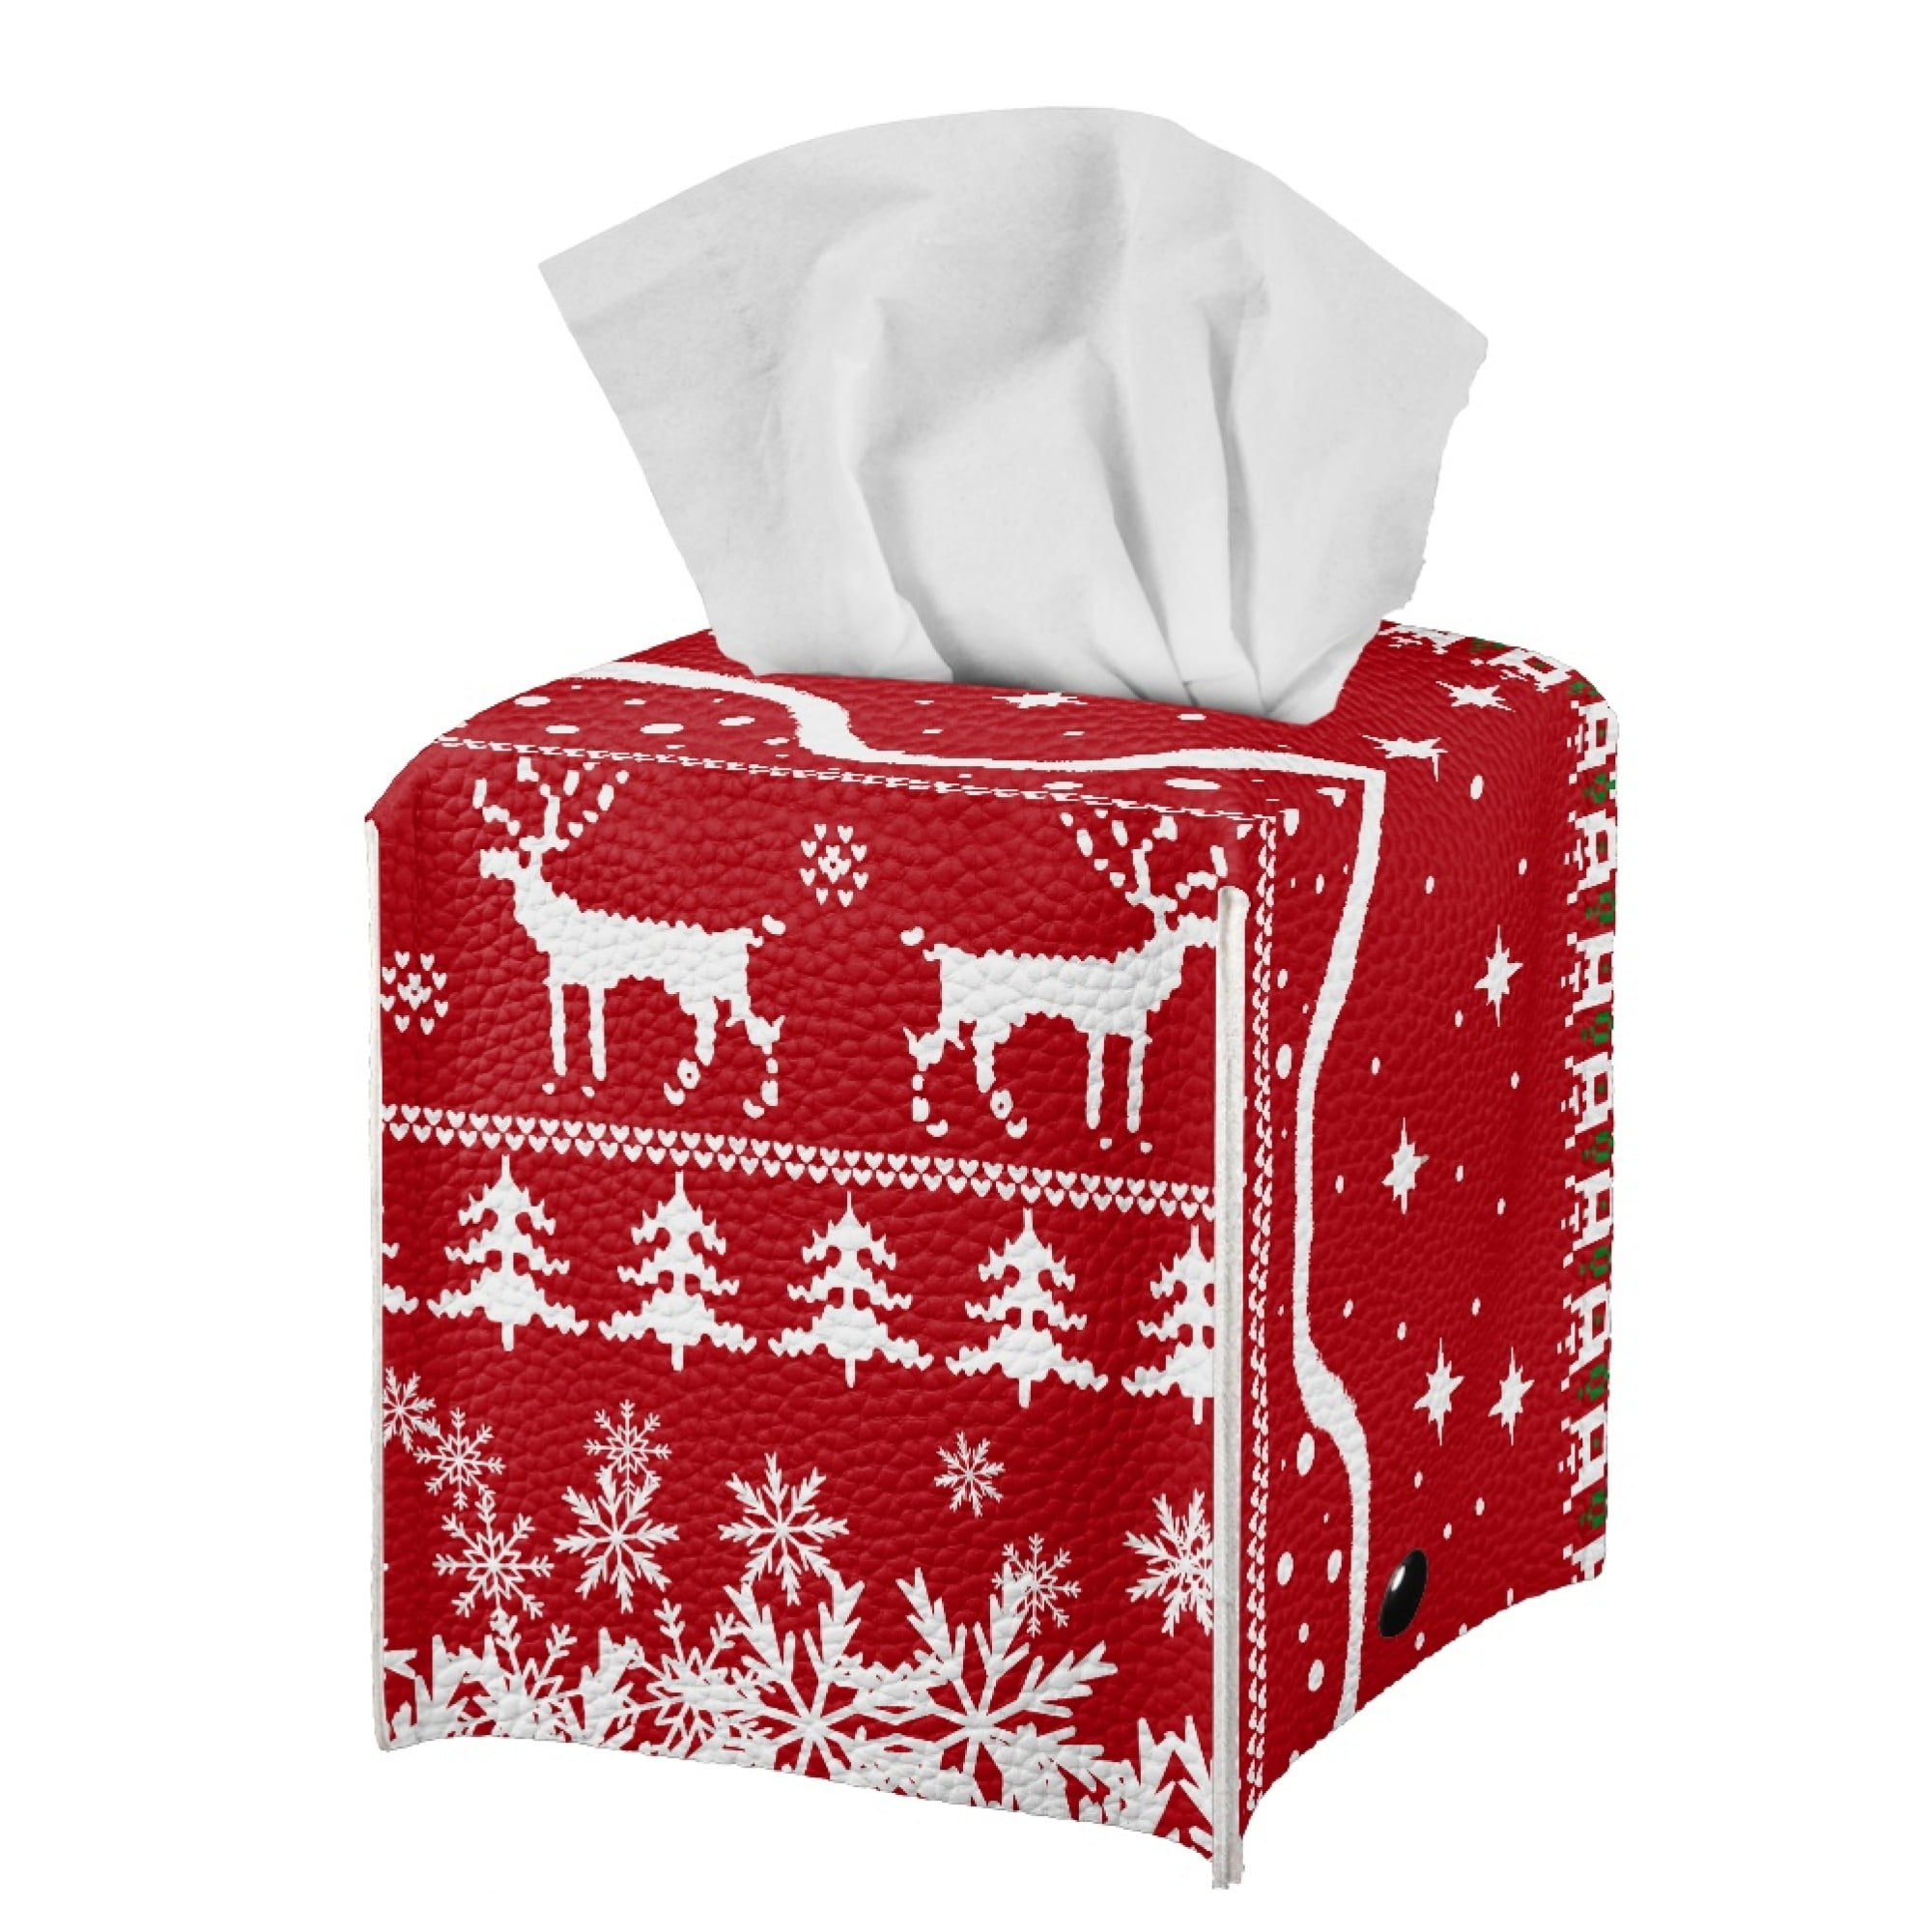 Bivenant Store Christmas Theme Tissue Box Cover Square Tissues Cube Box  Holder Decorative for Bathroom Vanity Countertop/Night Stands/Office Desk